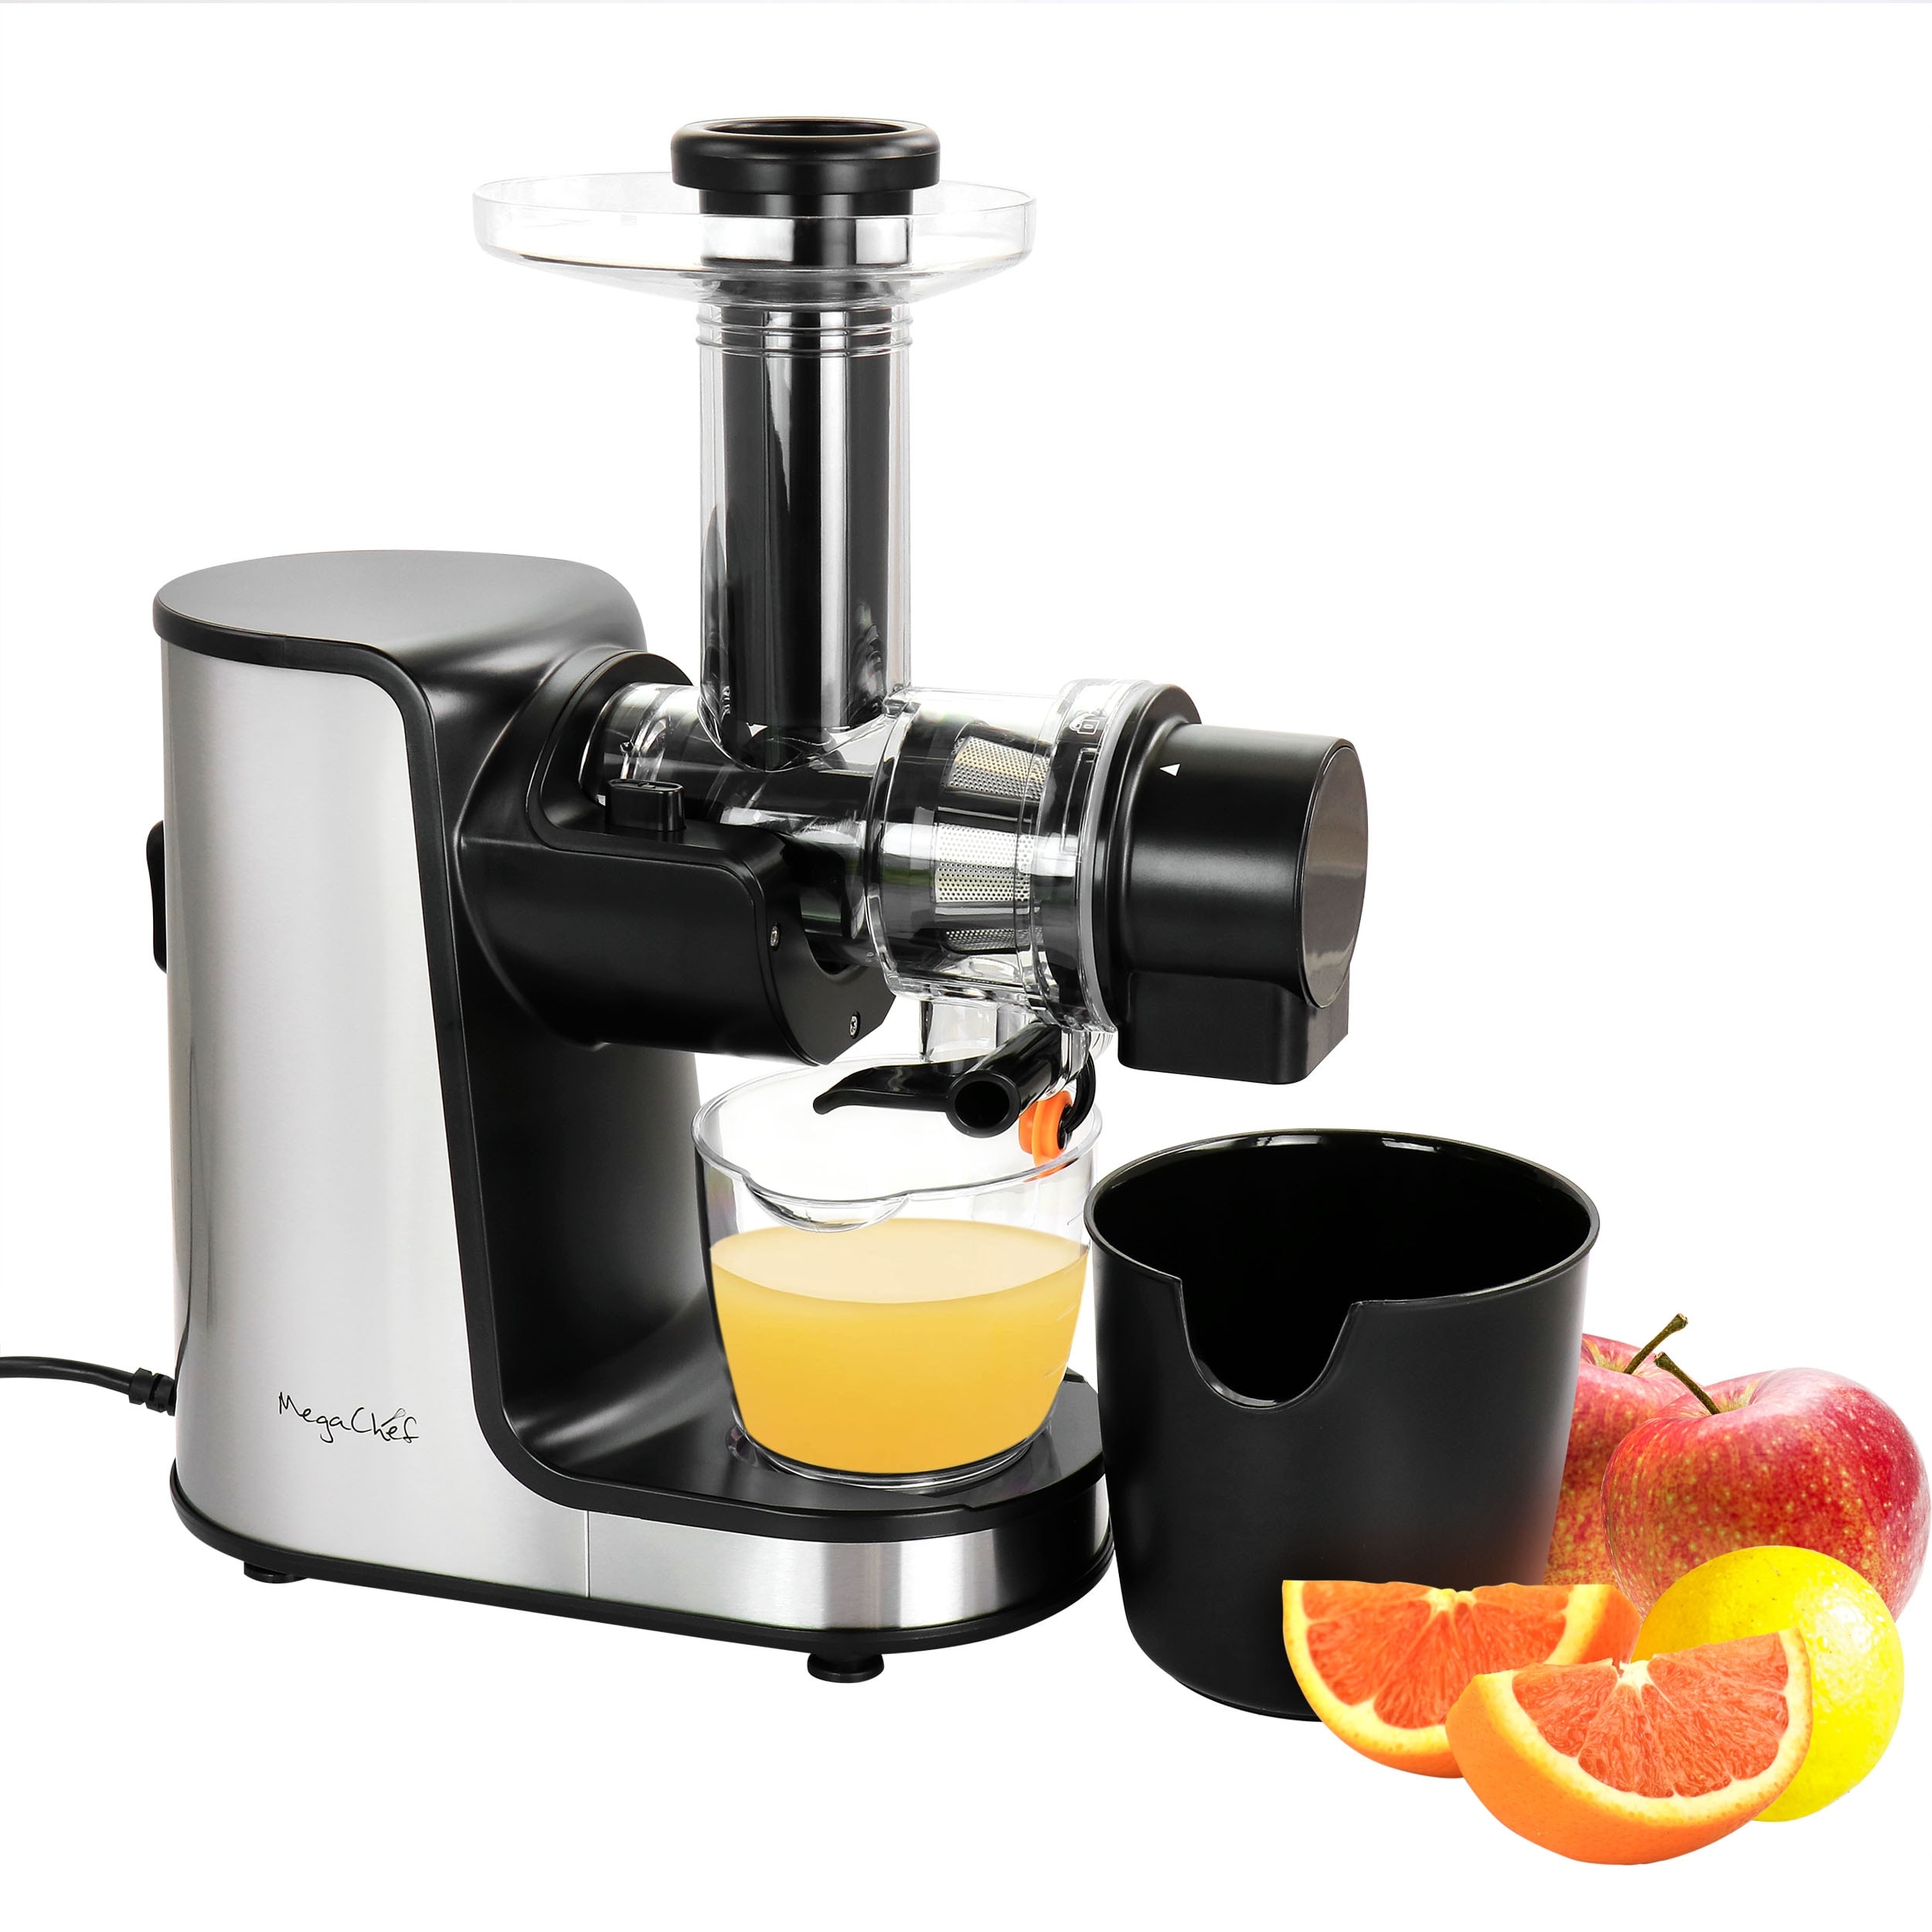 https://ak1.ostkcdn.com/images/products/is/images/direct/80615bb3b7c593b4f2ebfbd78407ceaba9a3fc16/MegaChef-Masticating-Slow-Juicer-Extractor-with-Reverse-Function%2C-Cold-Press-Juicer-Machine-with-Quiet-Motor.jpg